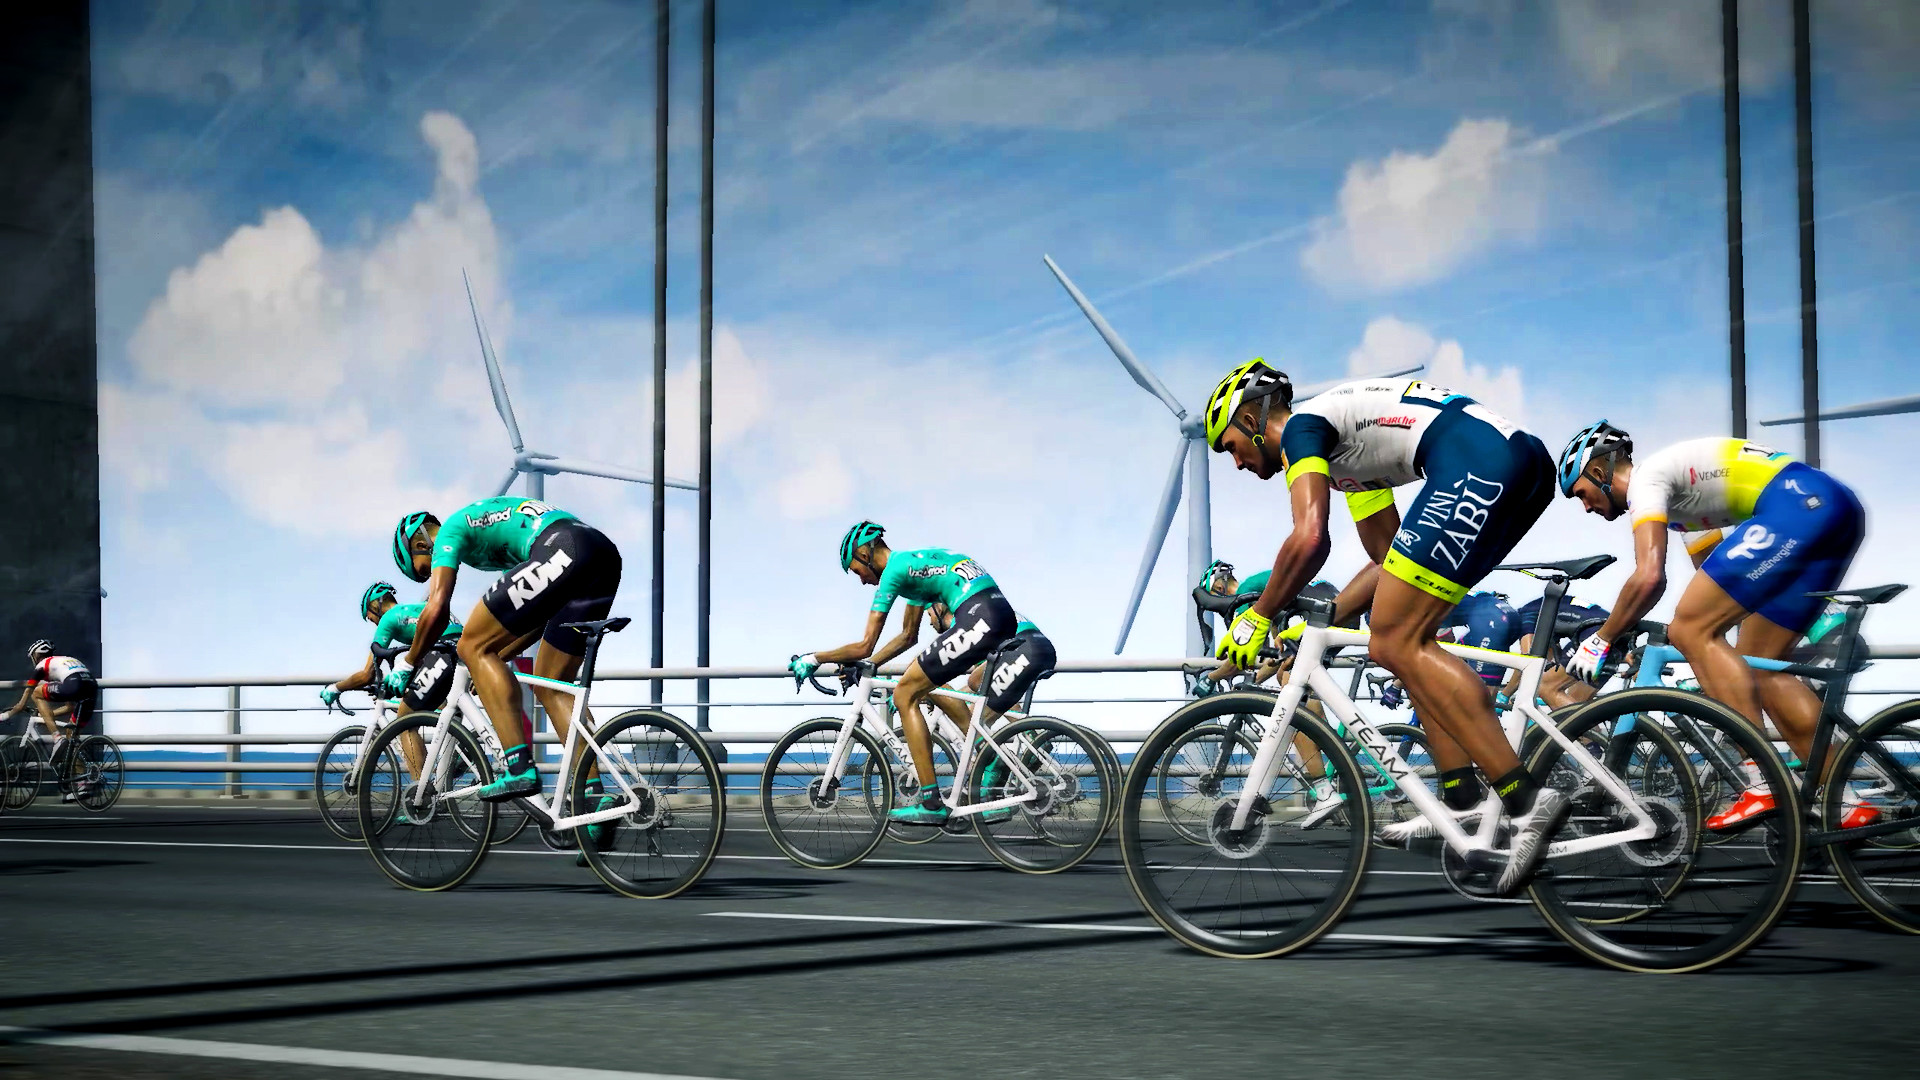 Pro Cycling Manager 2021 - Launch Trailer 